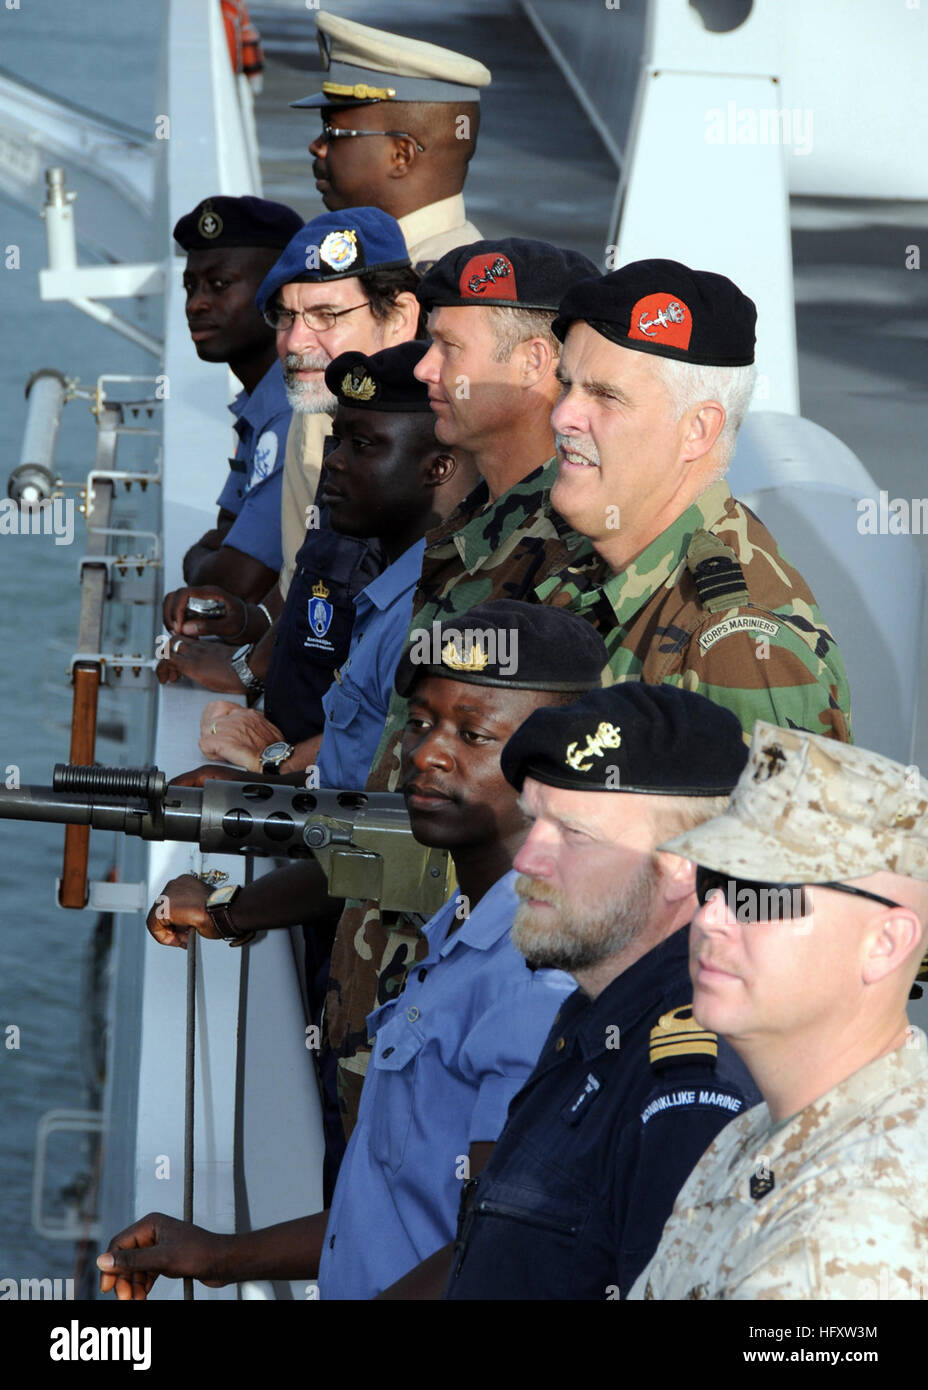 091014-O-1429M-013 FREETOWN, Sierra Leone (Oct. 14, 2009) Sailors and Marines from Ghana, Senegal, the Netherlands and the U.S. man the rails aboard the Royal Dutch navy amphibious ship HNLMS Johan De Witt (L 801) as the ship enters port.  Johan De Witt is in Sierra Leone for a two-day port visit where she will deliver medical and relief supplies supporting Africa Partnership Station.  Johan De Witt is the first European-led Africa Partnership Station platform and is augmented by personnel from Belgium, Portugal and the United States.  Africa Partnership Station was originally a U.S. Navy init Stock Photo